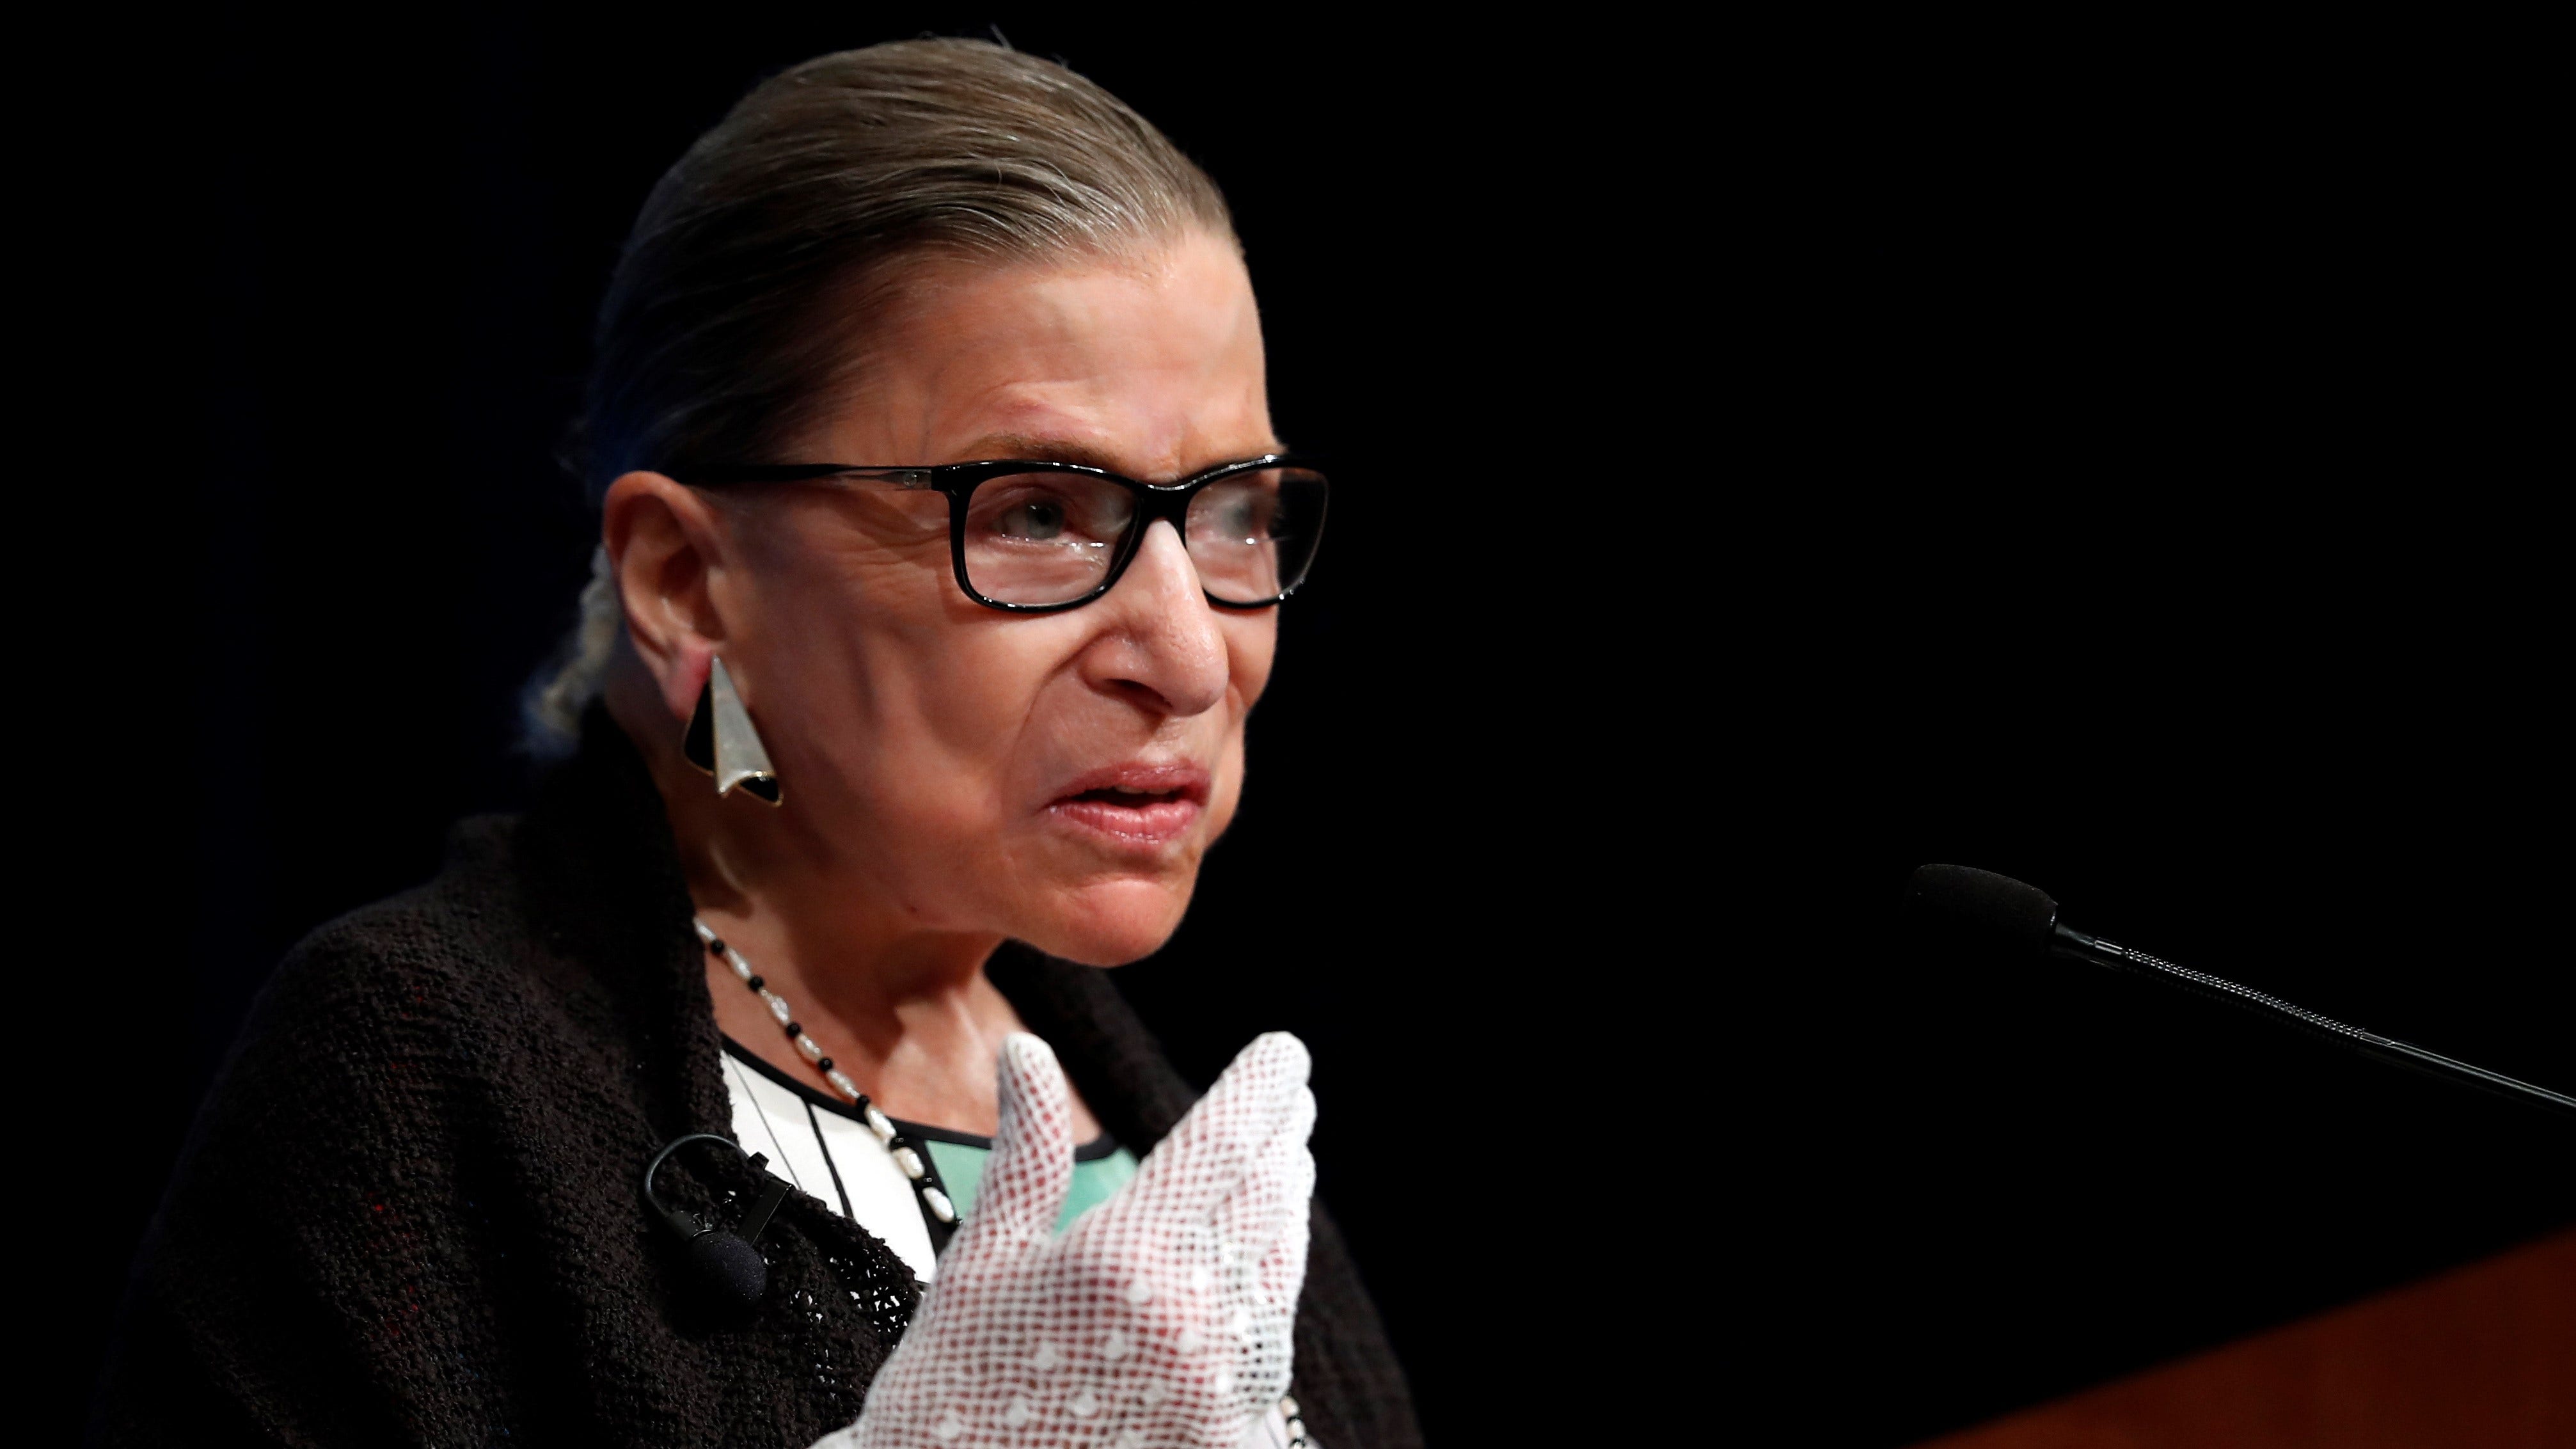 FLASHBACK: Ruth Bader Ginsburg opposed court packing, said 'nine seems to be a good number'